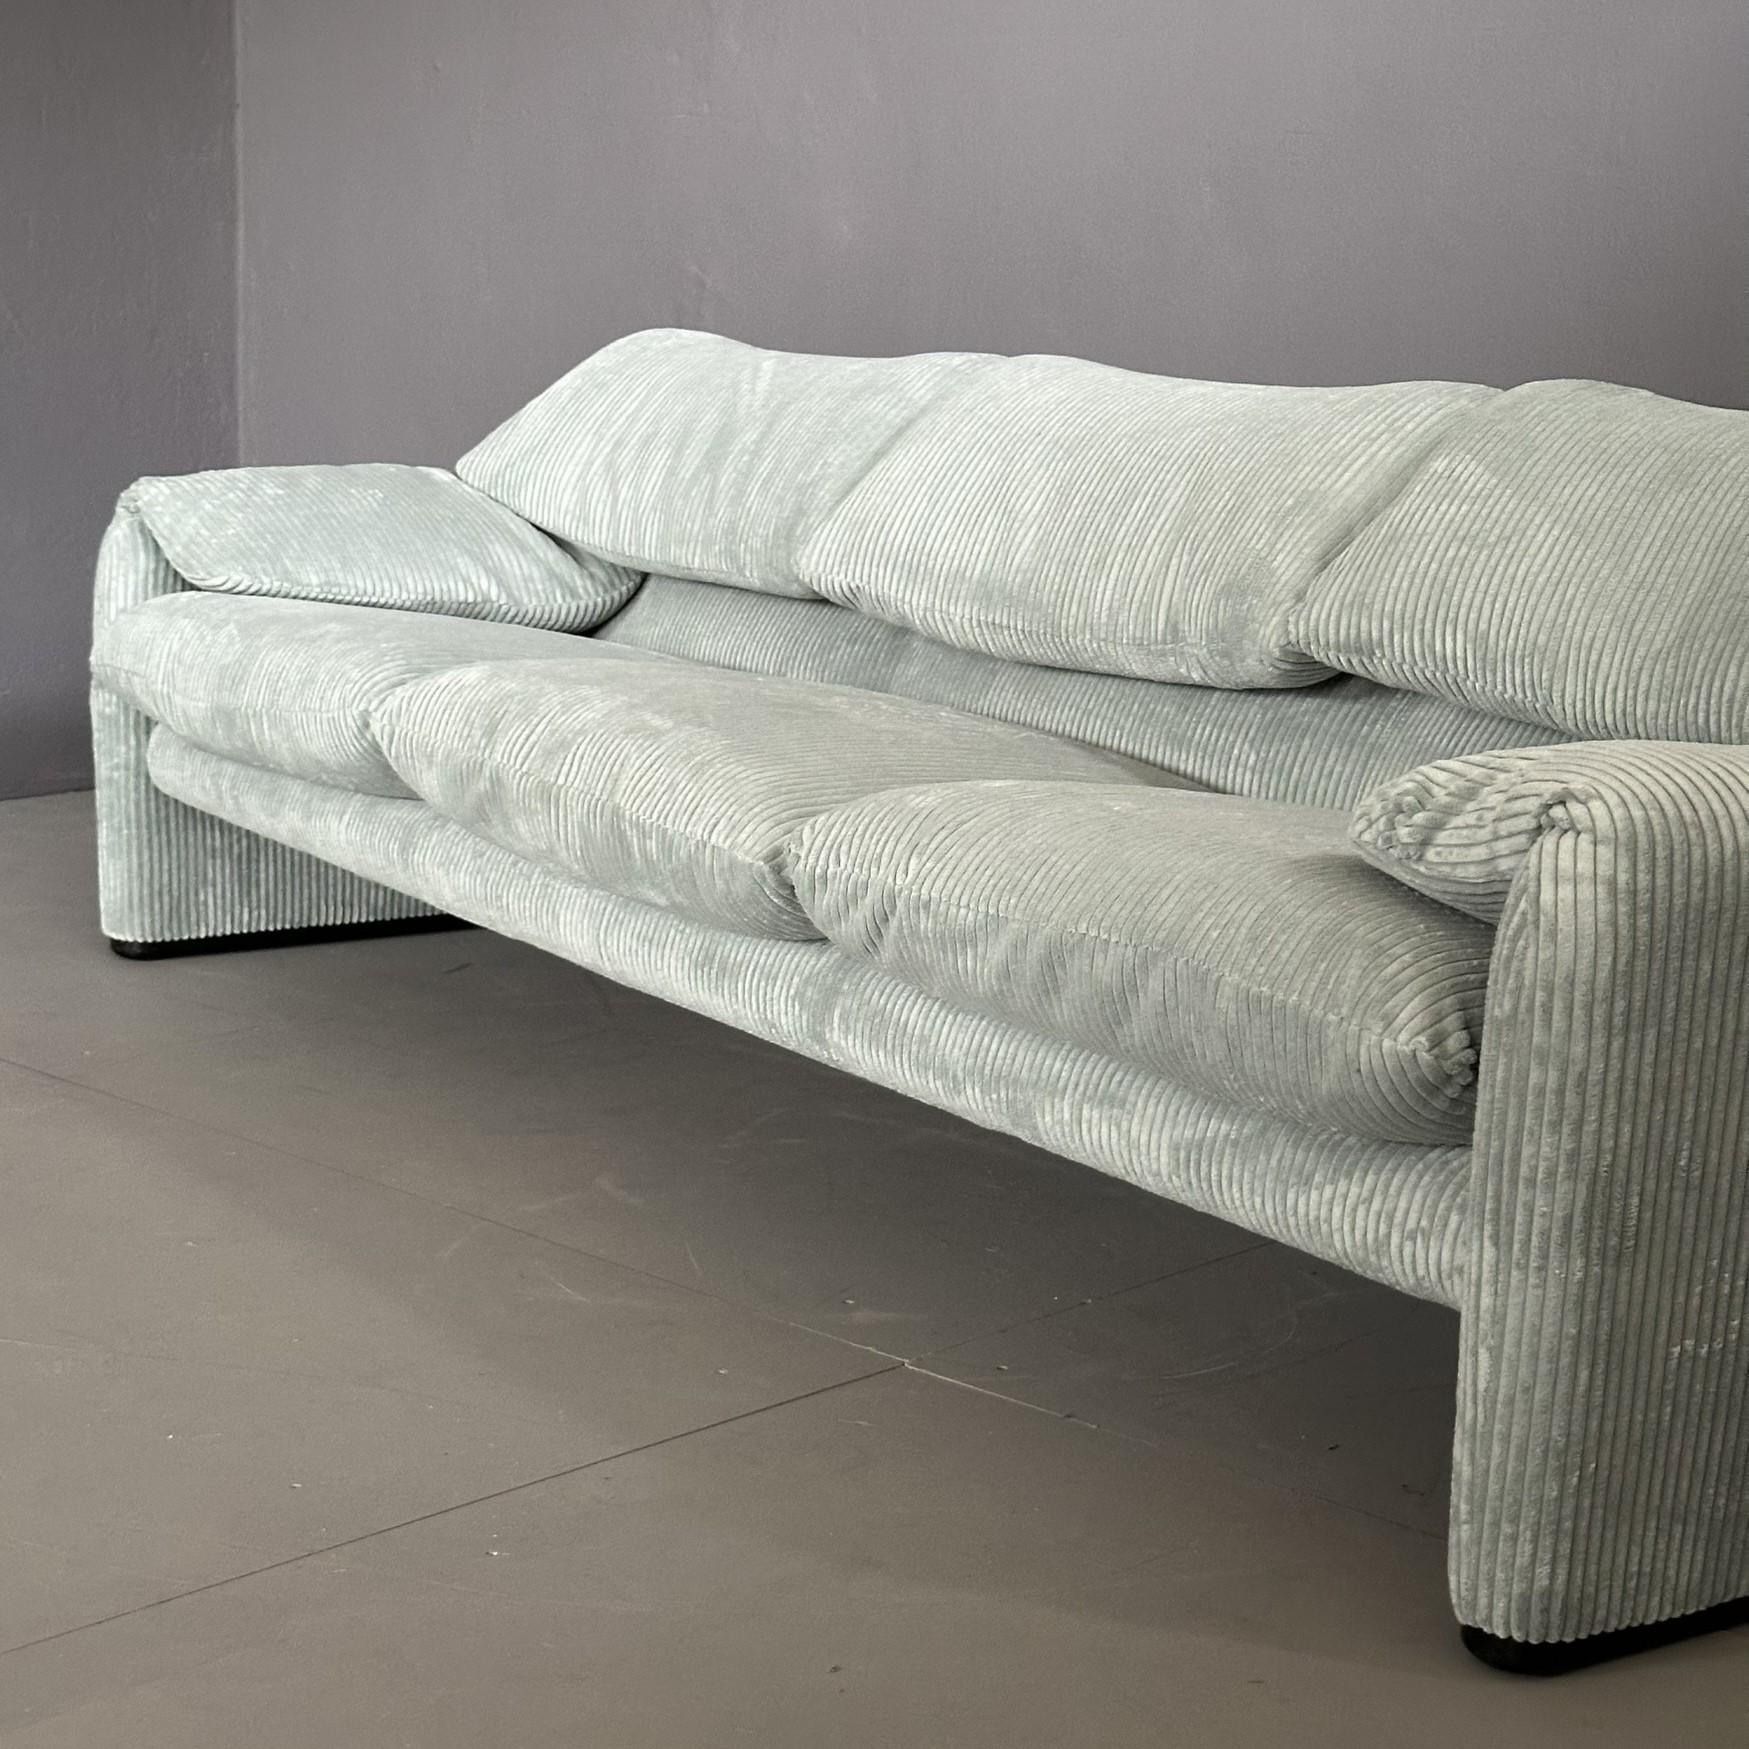 Pair of Maralunga sofas design by Vico Magistretti for Cassina 2seater - 3seater For Sale 1